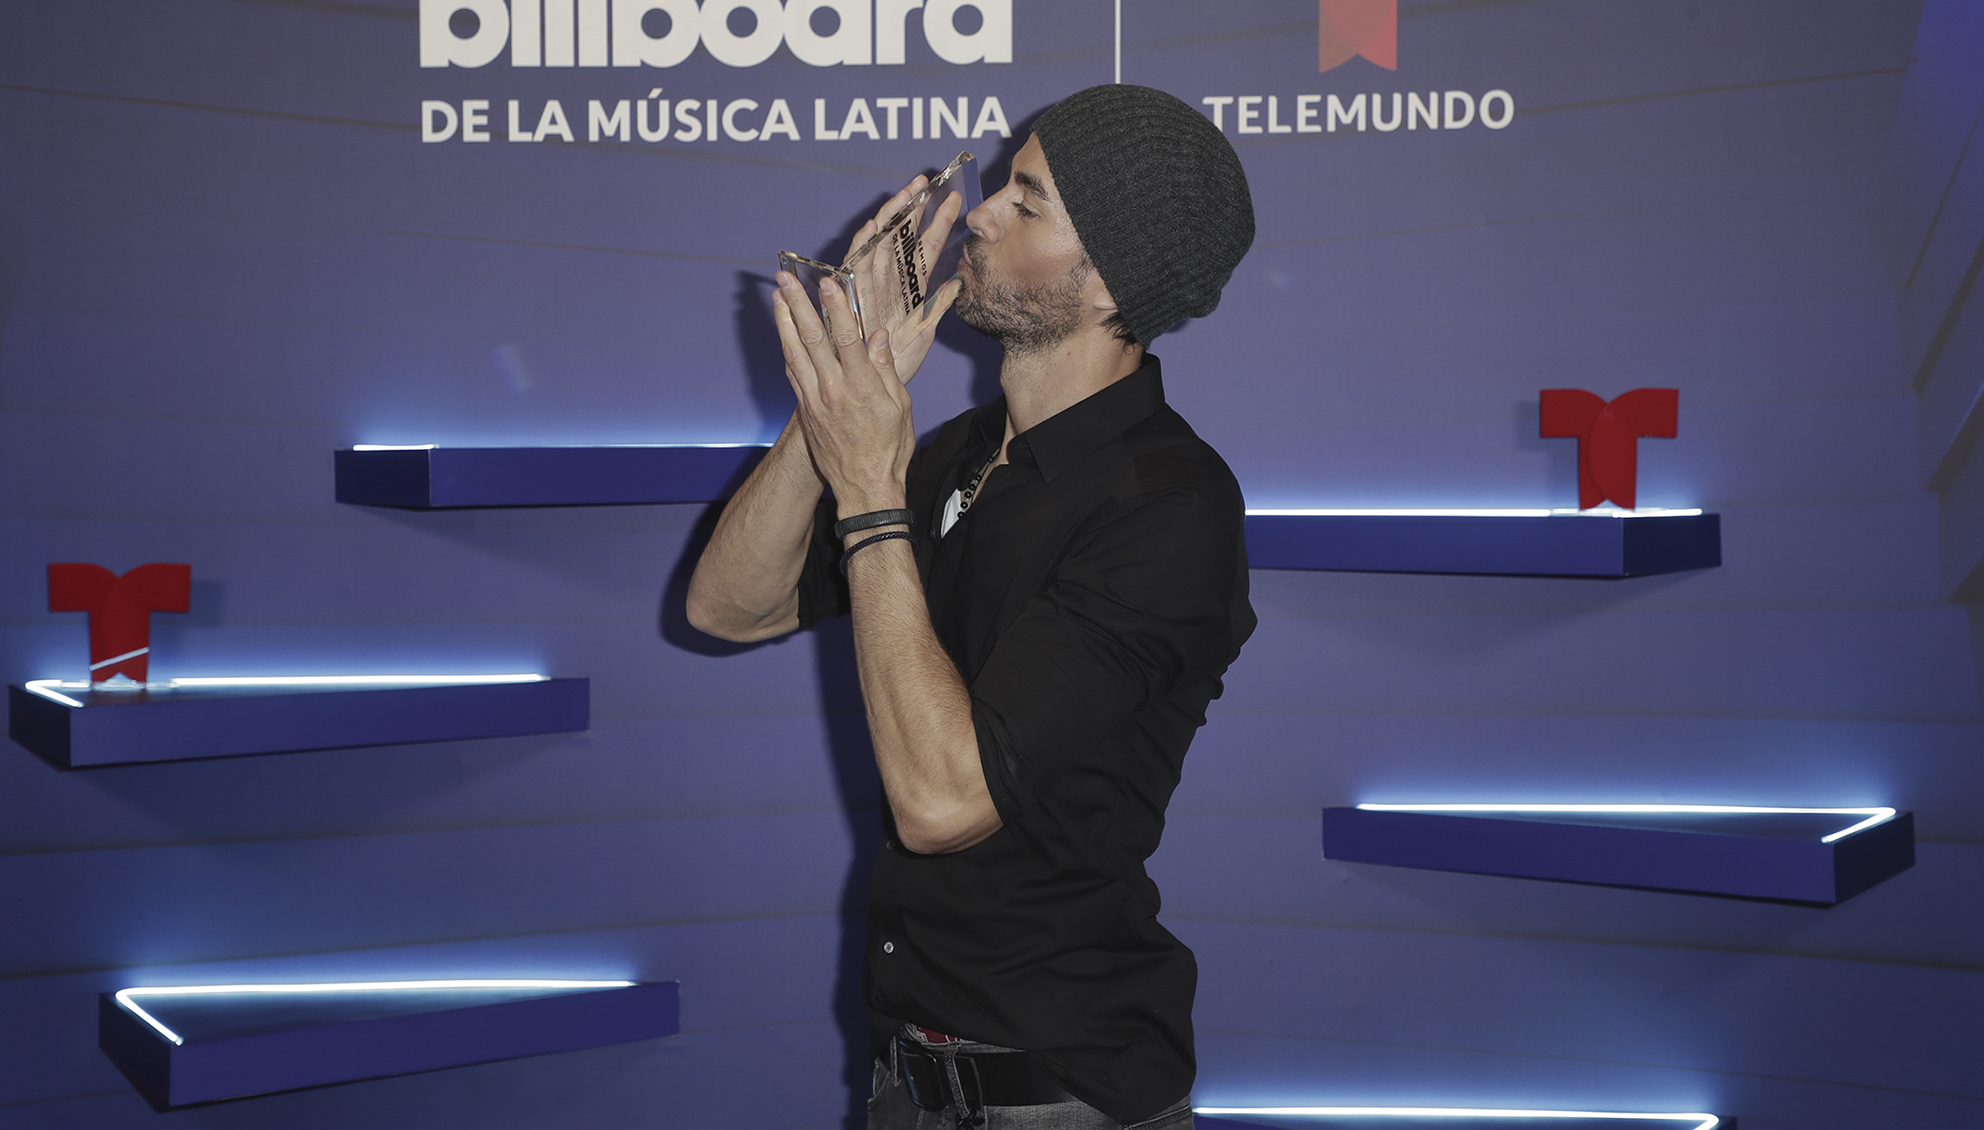 ENRIQUE IGLESIAS RECOGNISED AS THE GREATEST LATIN ARTIST OF ALL TIME